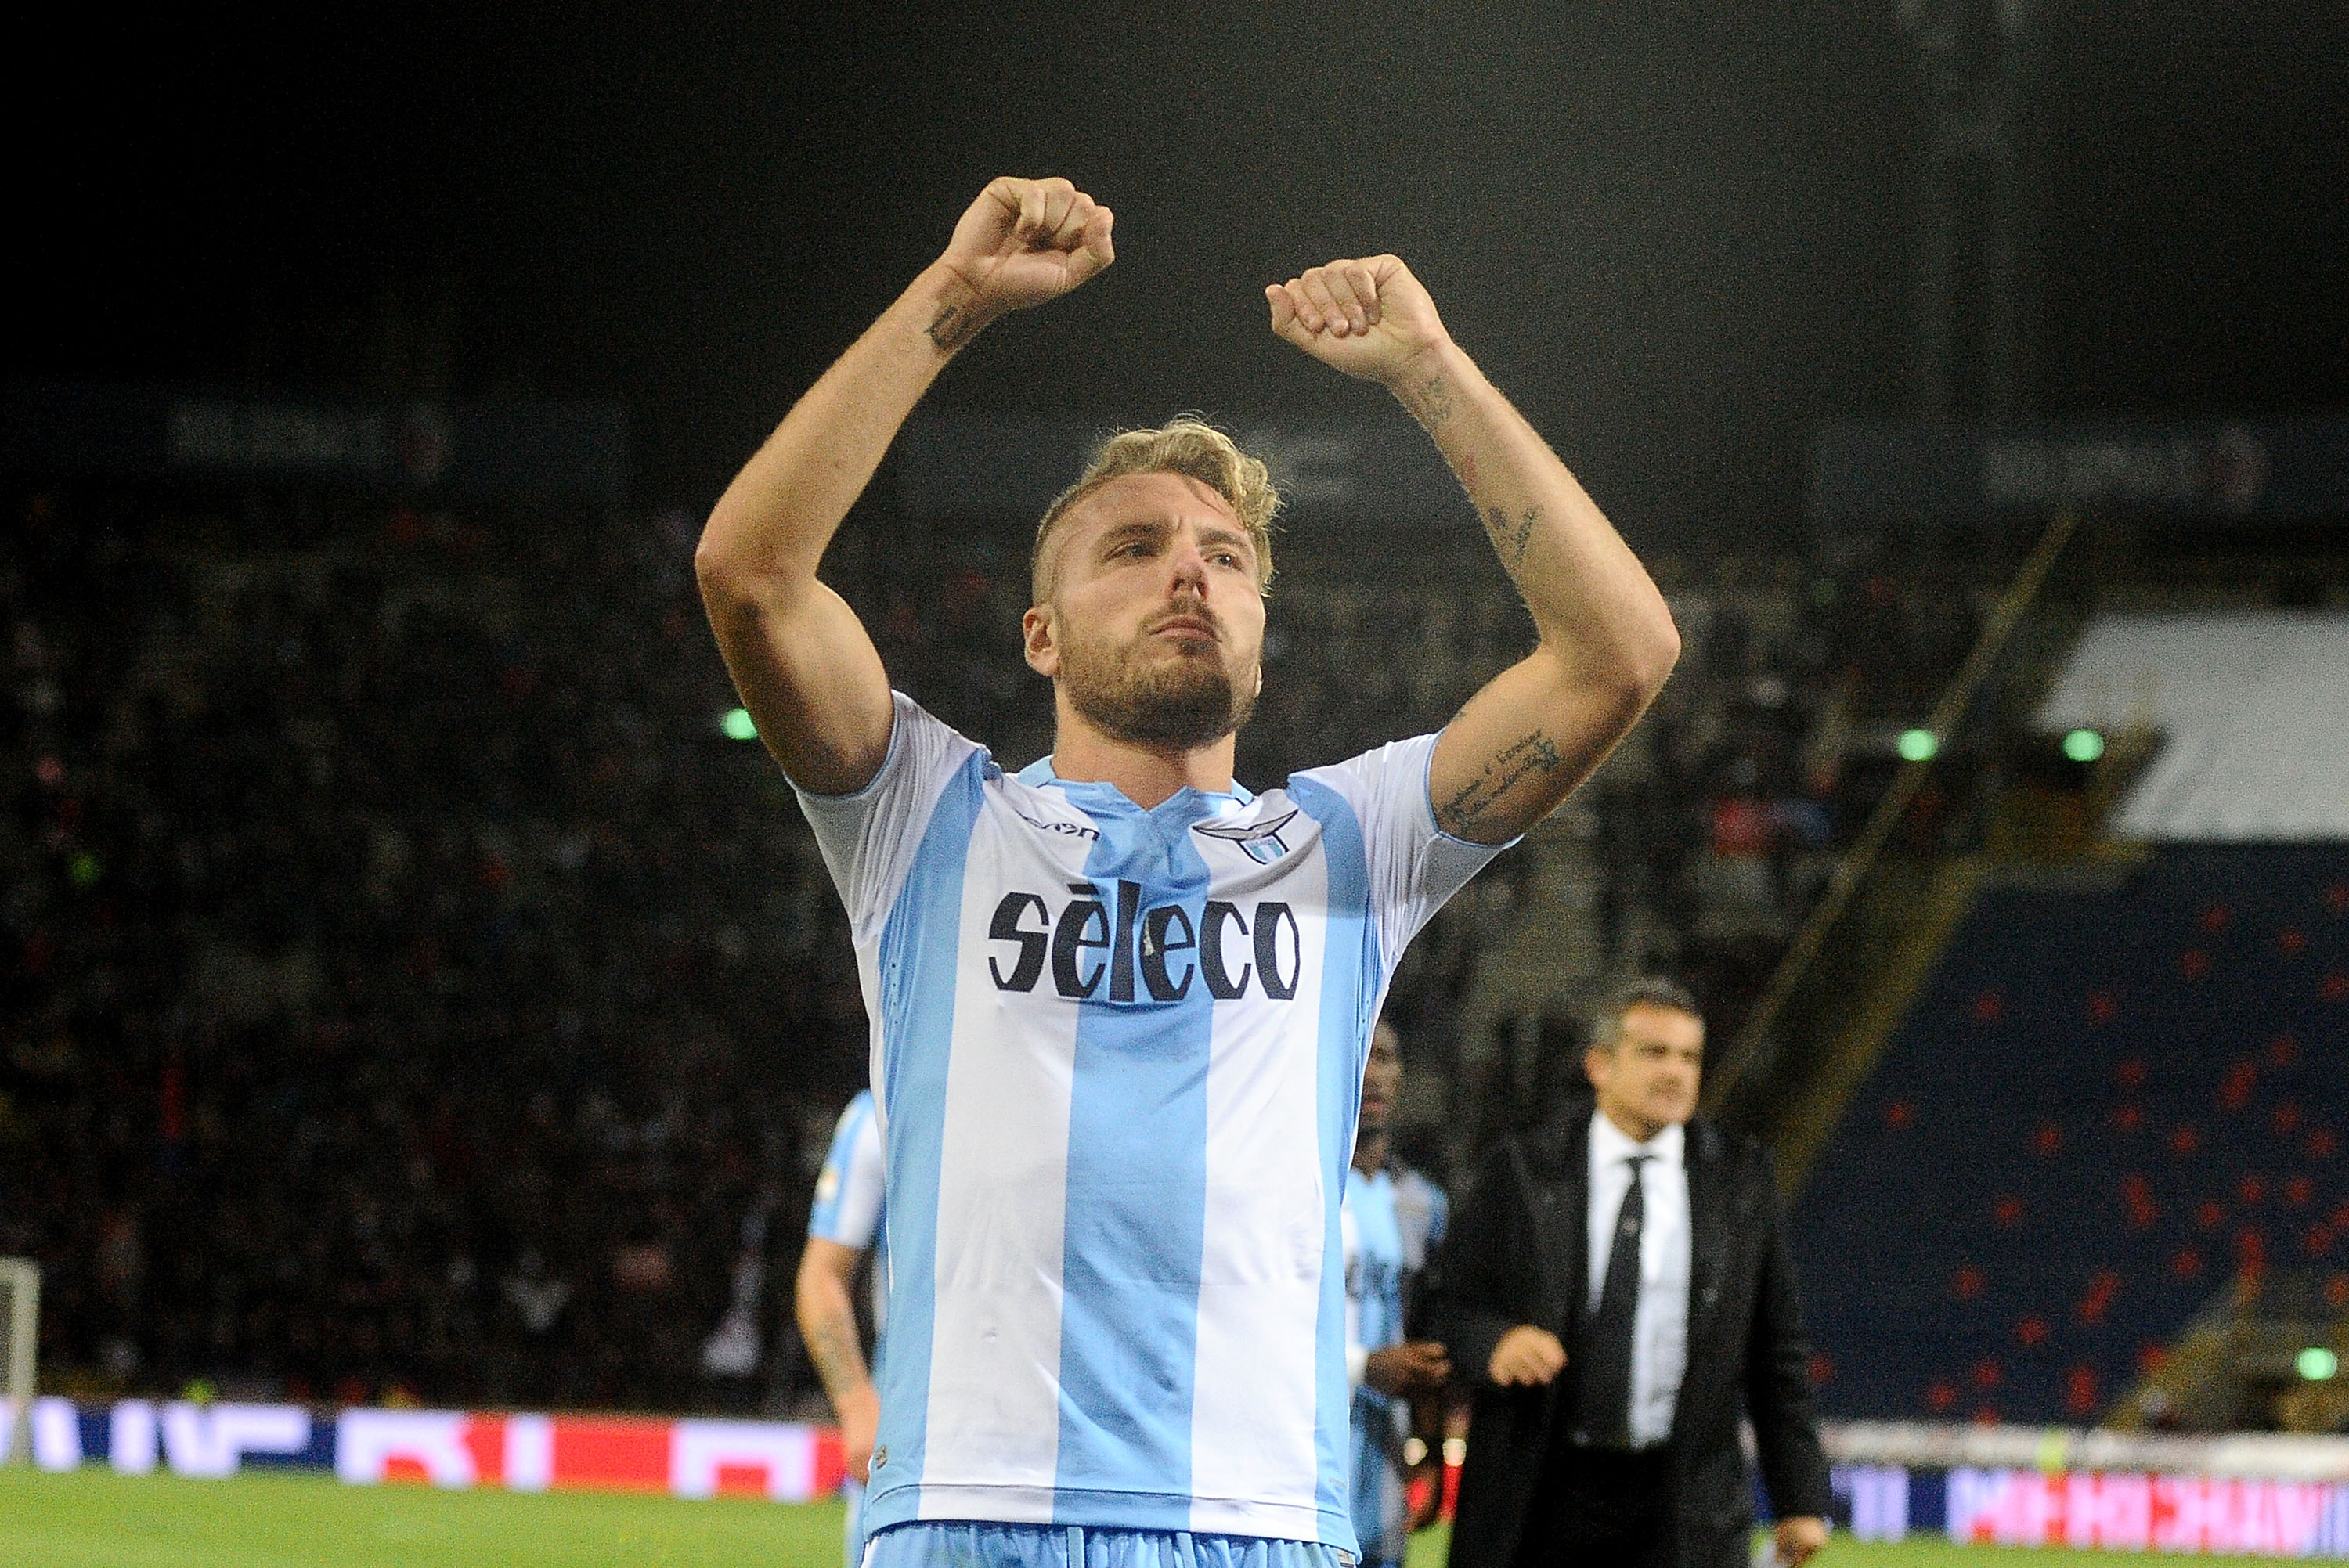 BOLOGNA, ITALY - OCTOBER 25: Ciro Immobile of SS Lazio celebtrates at the end of  the Serie A match between Bologna FC and SS Lazio at Stadio Renato Dall'Ara on October 25, 2017 in Bologna, Italy.  (Photo by Mario Carlini / Iguana Press/Getty Images)